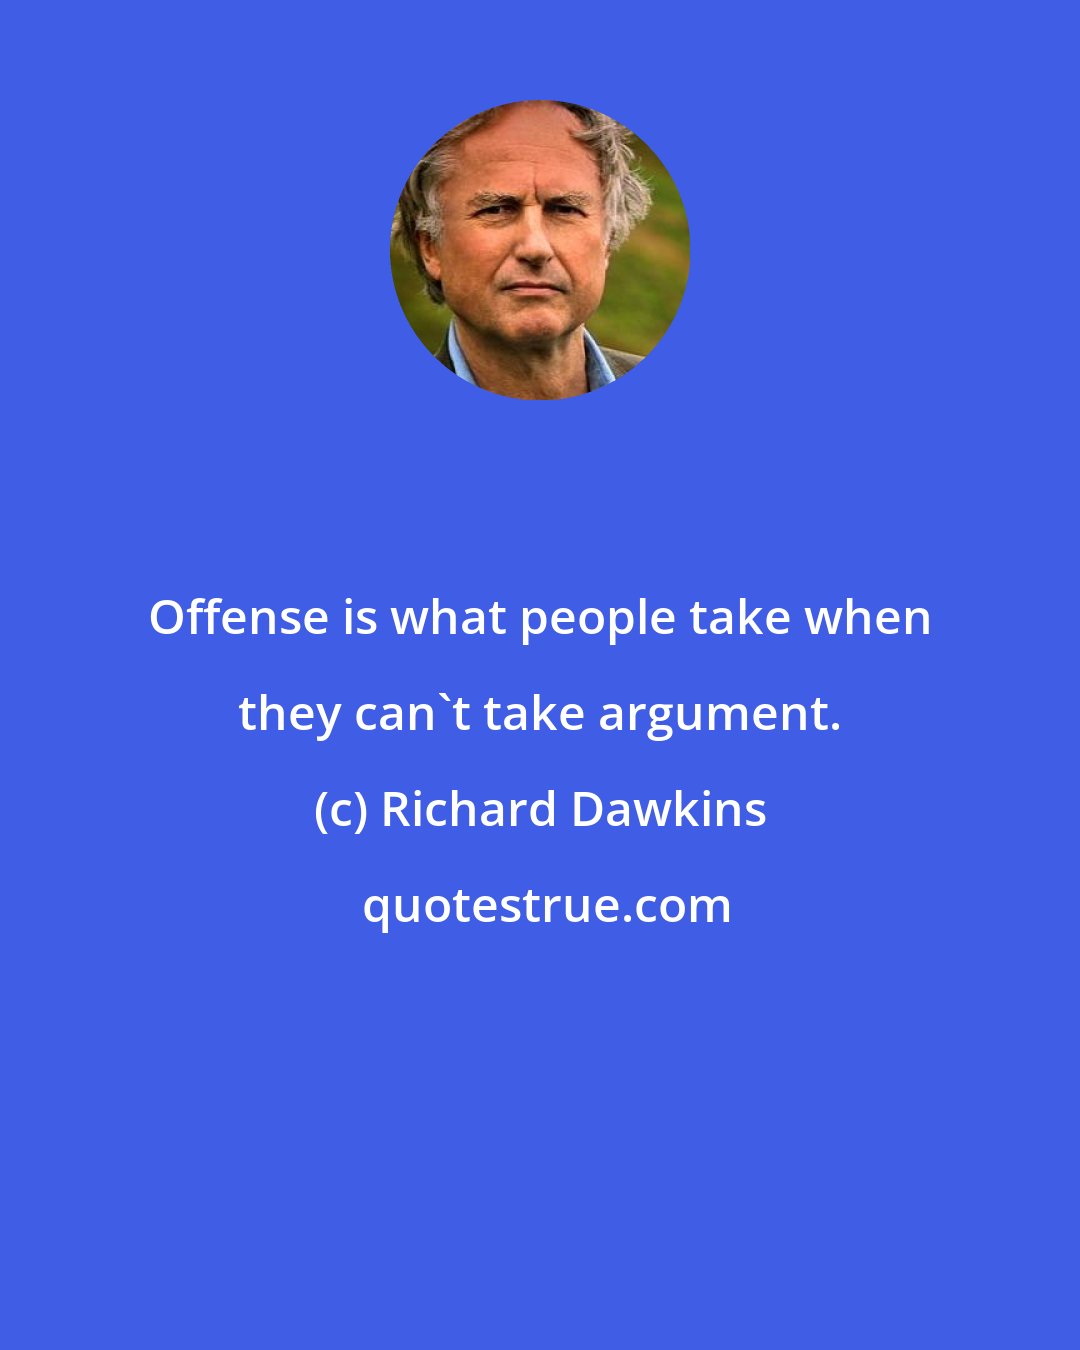 Richard Dawkins: Offense is what people take when they can't take argument.